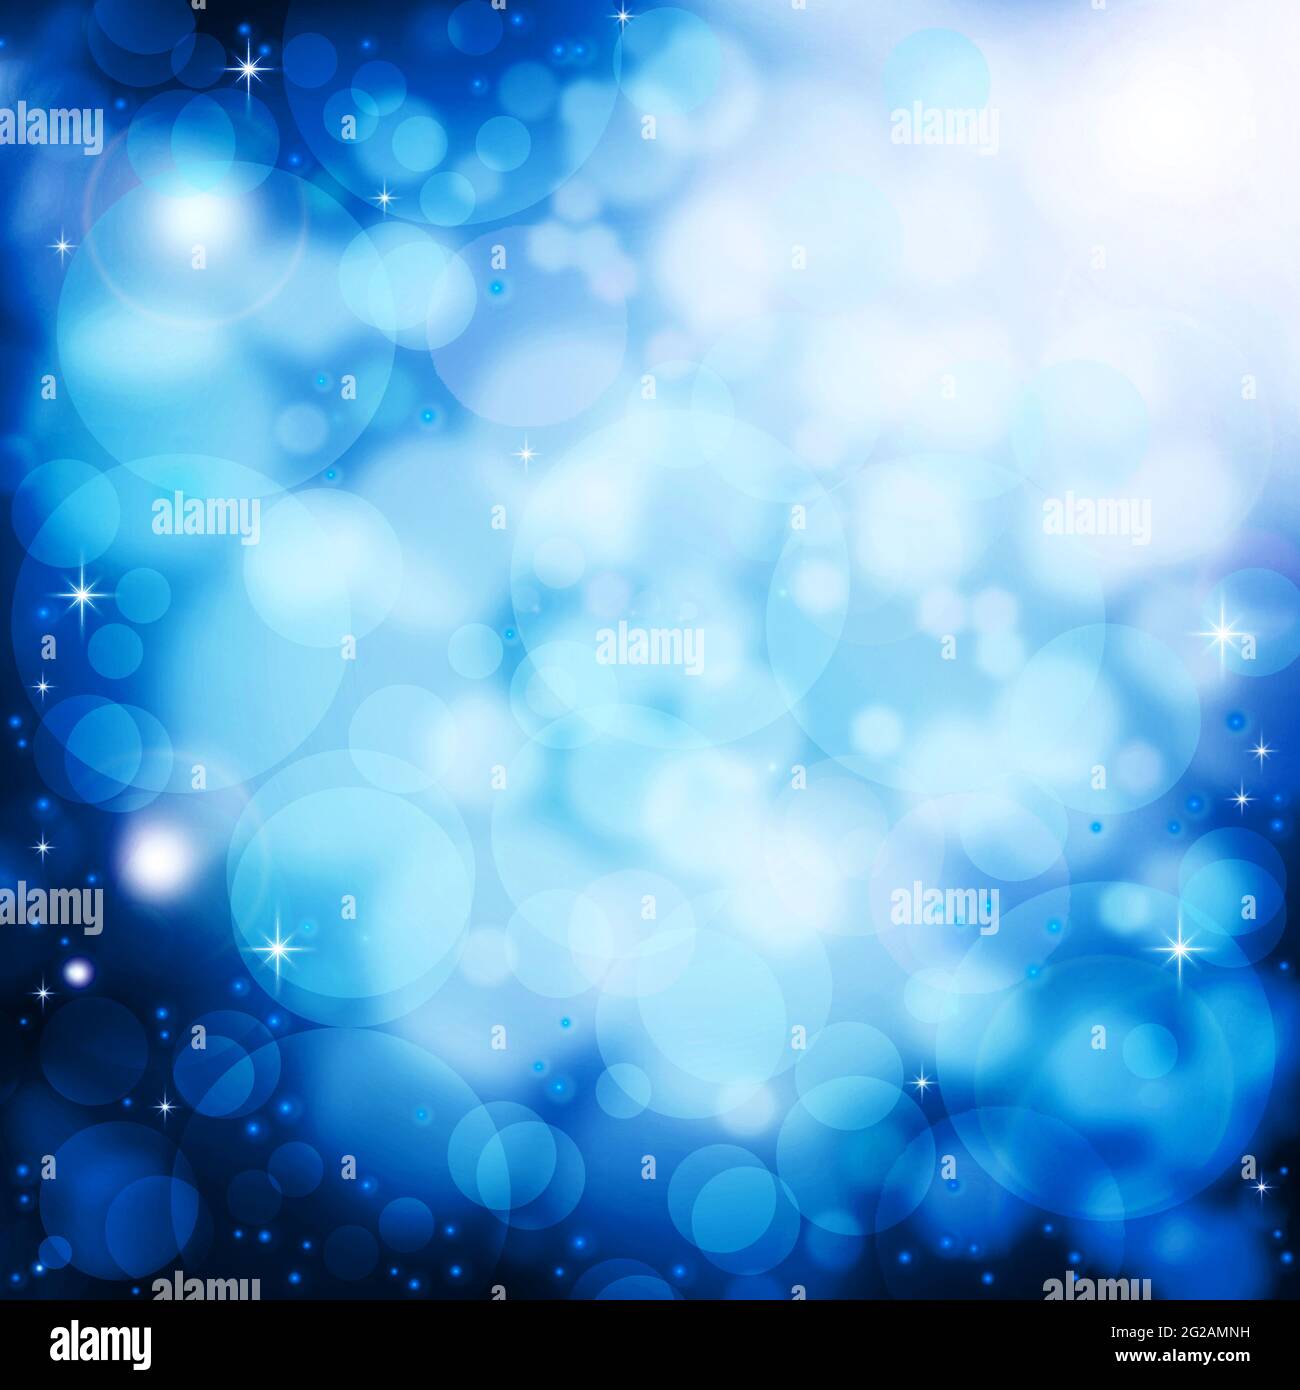 Abstract blue background with lens flare effect Stock Photo